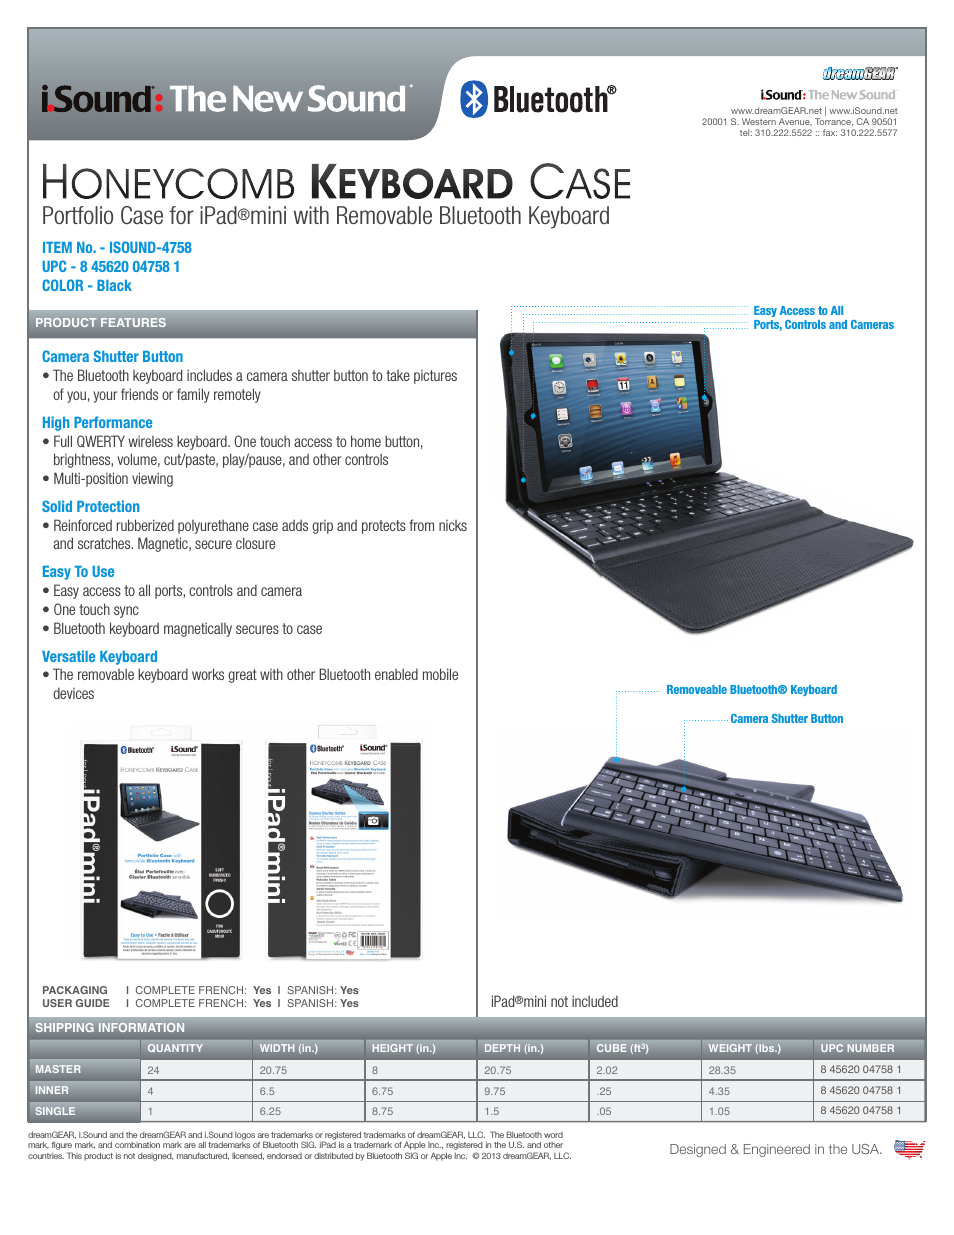 Honeycomb Keyboard Case with Bluetooth for iPadmini - Sell Sheet